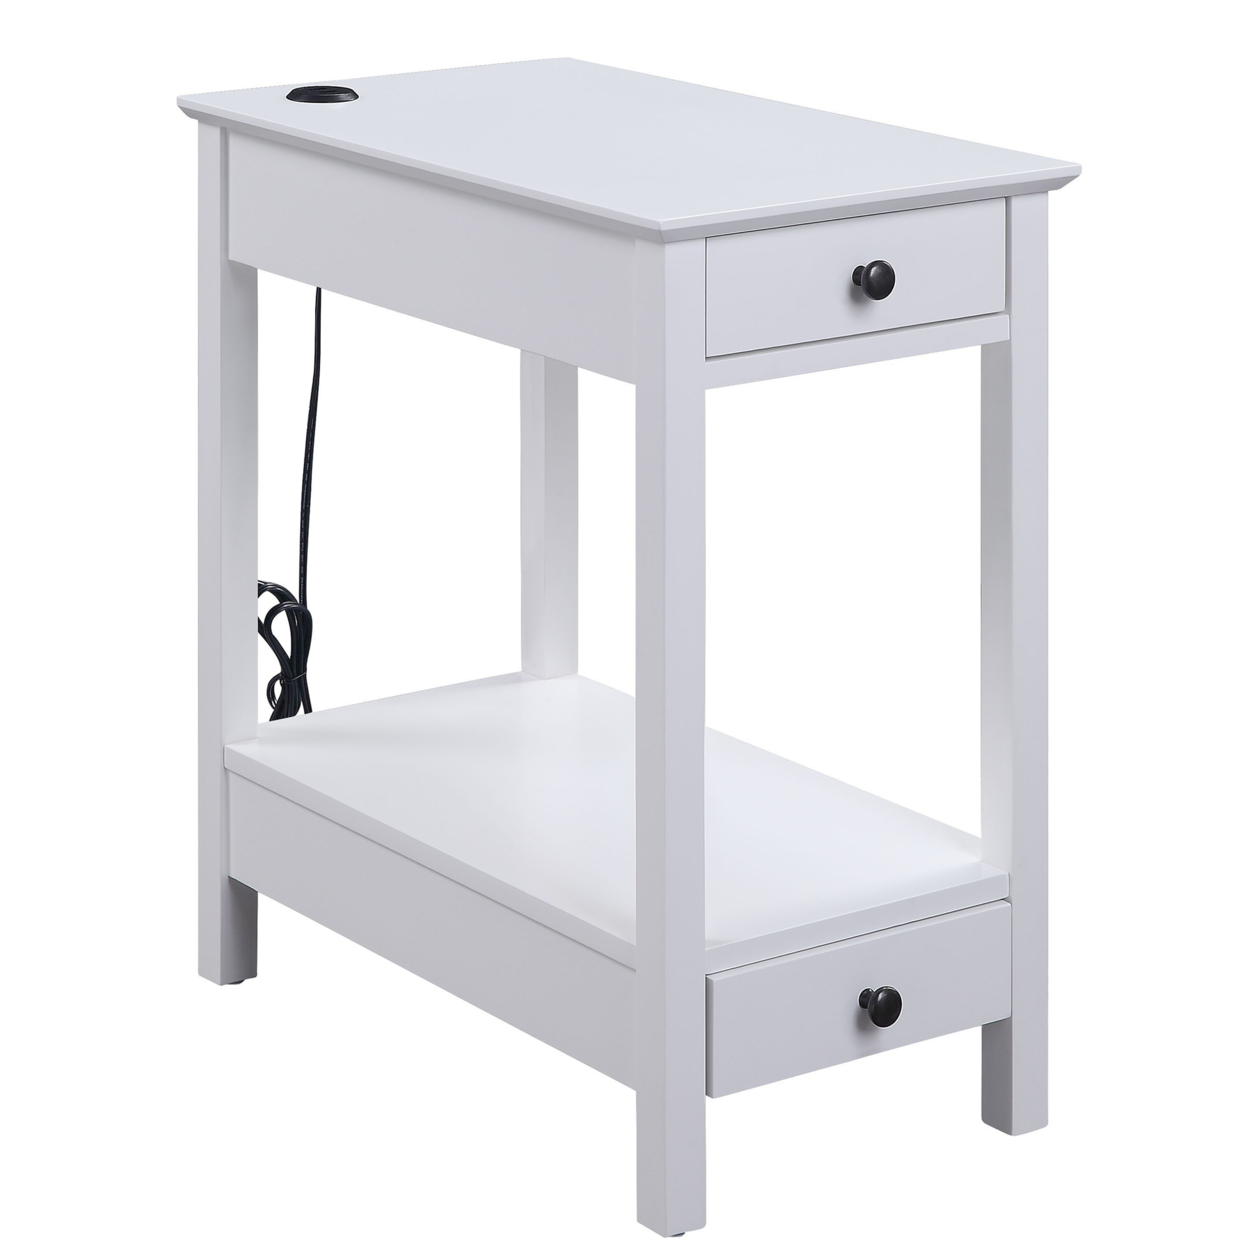 Wooden Frame Side Table With 2 Drawers And 1 Bottom Shelf, White- Saltoro Sherpi